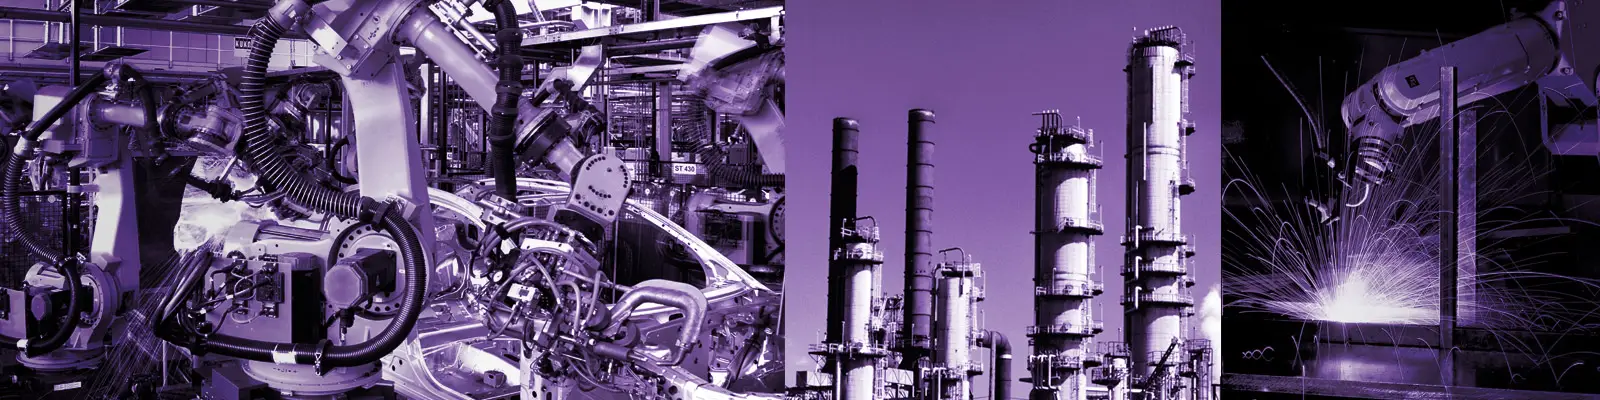 VFD Applications - automotive manufacturing; oil, gas or petrochemical refineries; automation